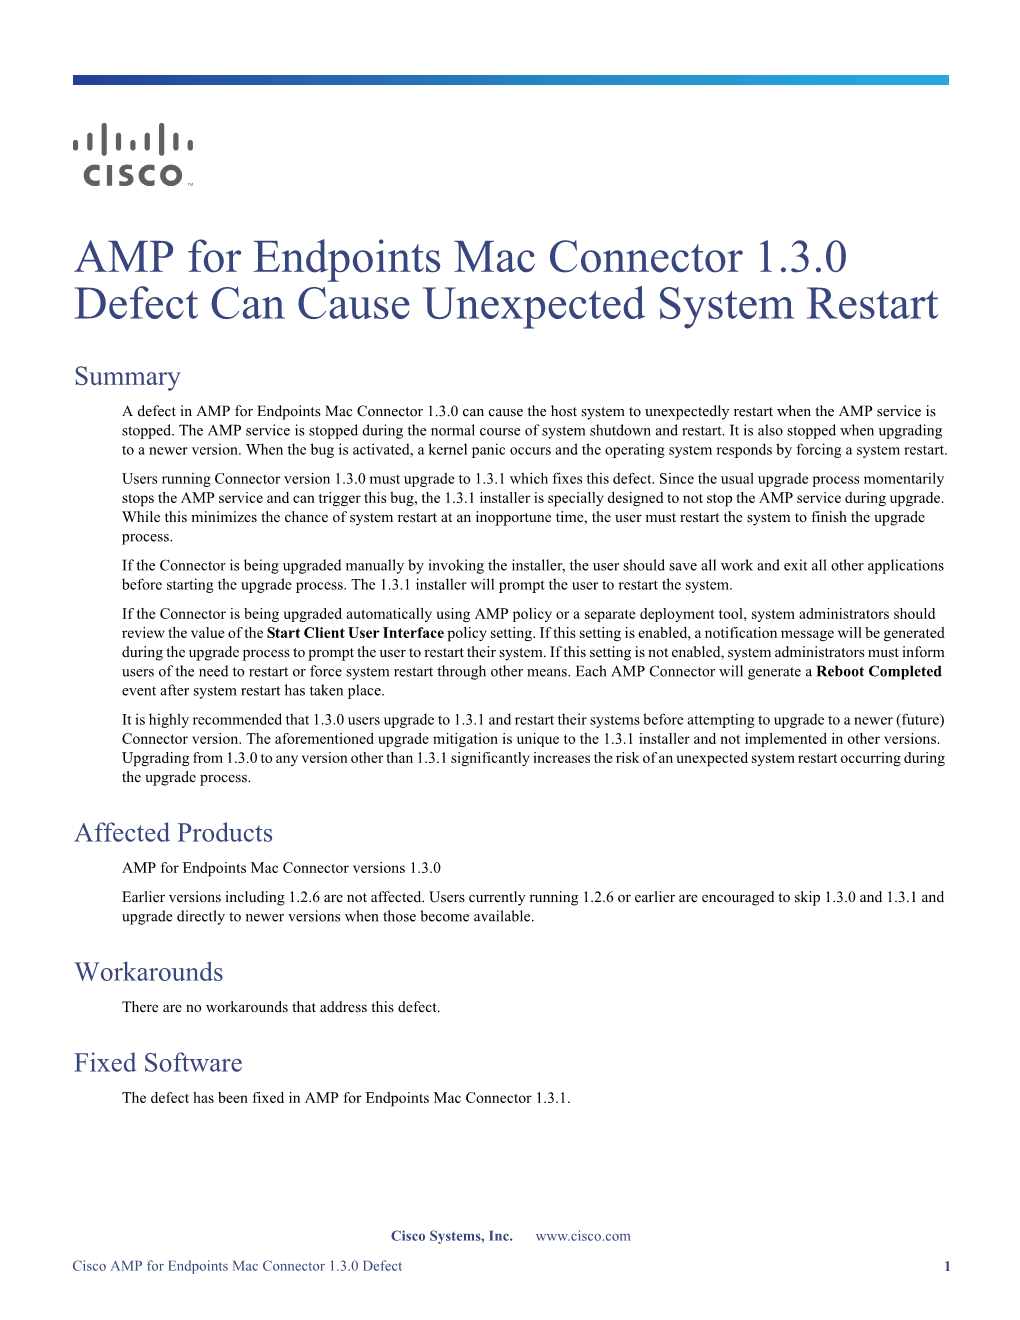 AMP for Endpoints Mac Connector 1.3.0 Defect Can Cause Unexpected System Restart